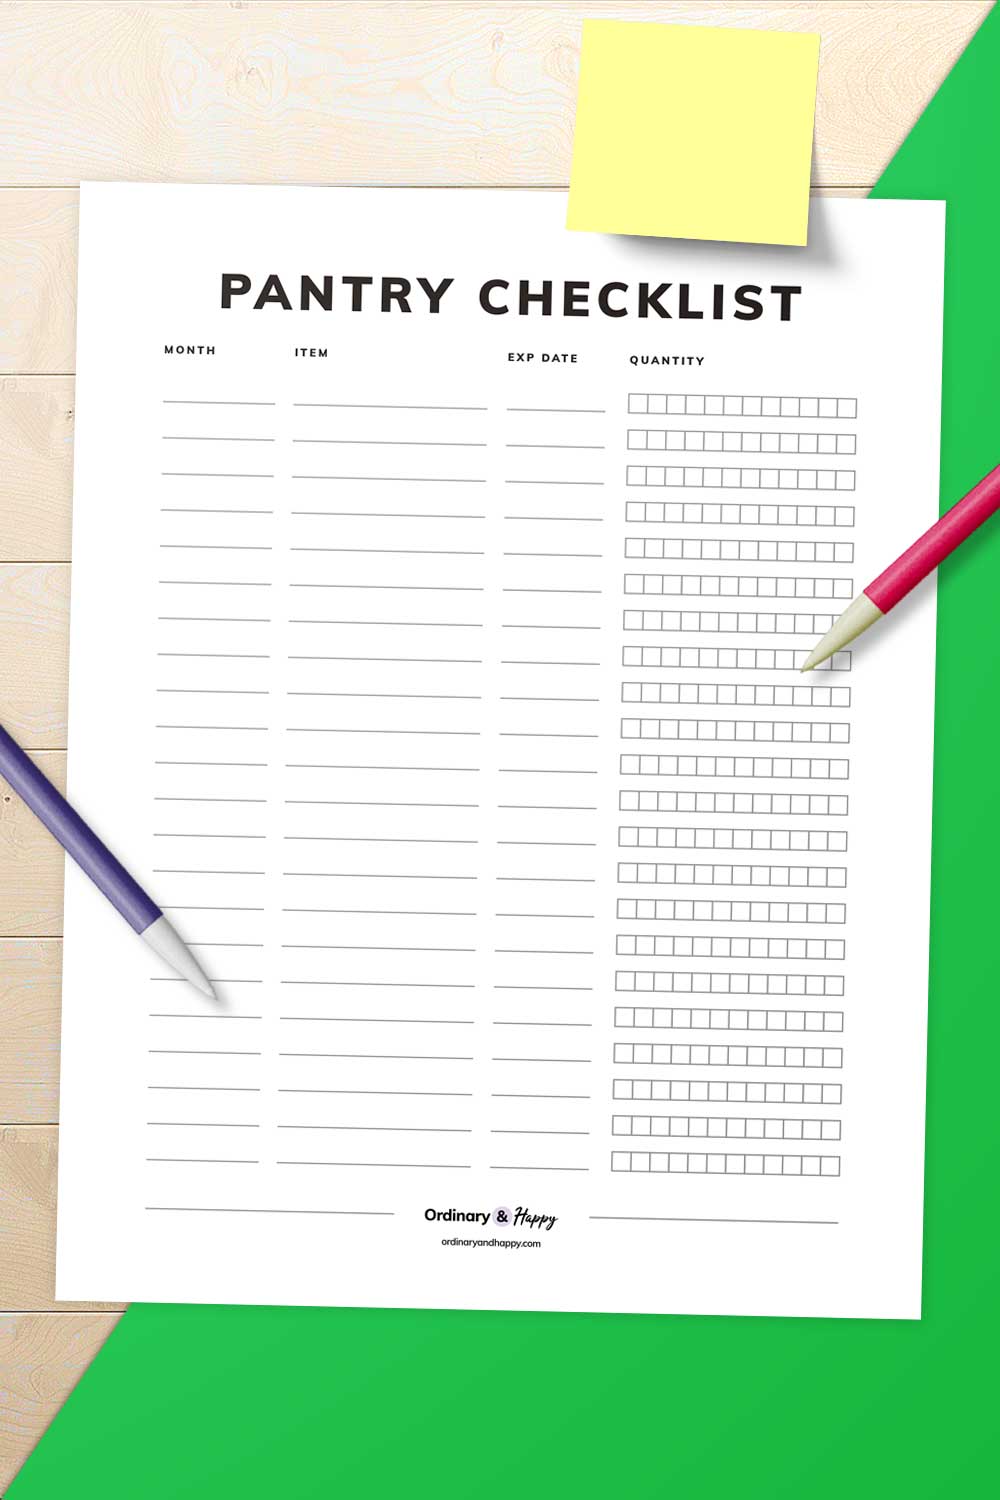 4 Pantry Inventory Template Printables to Get Your Pantry Organized